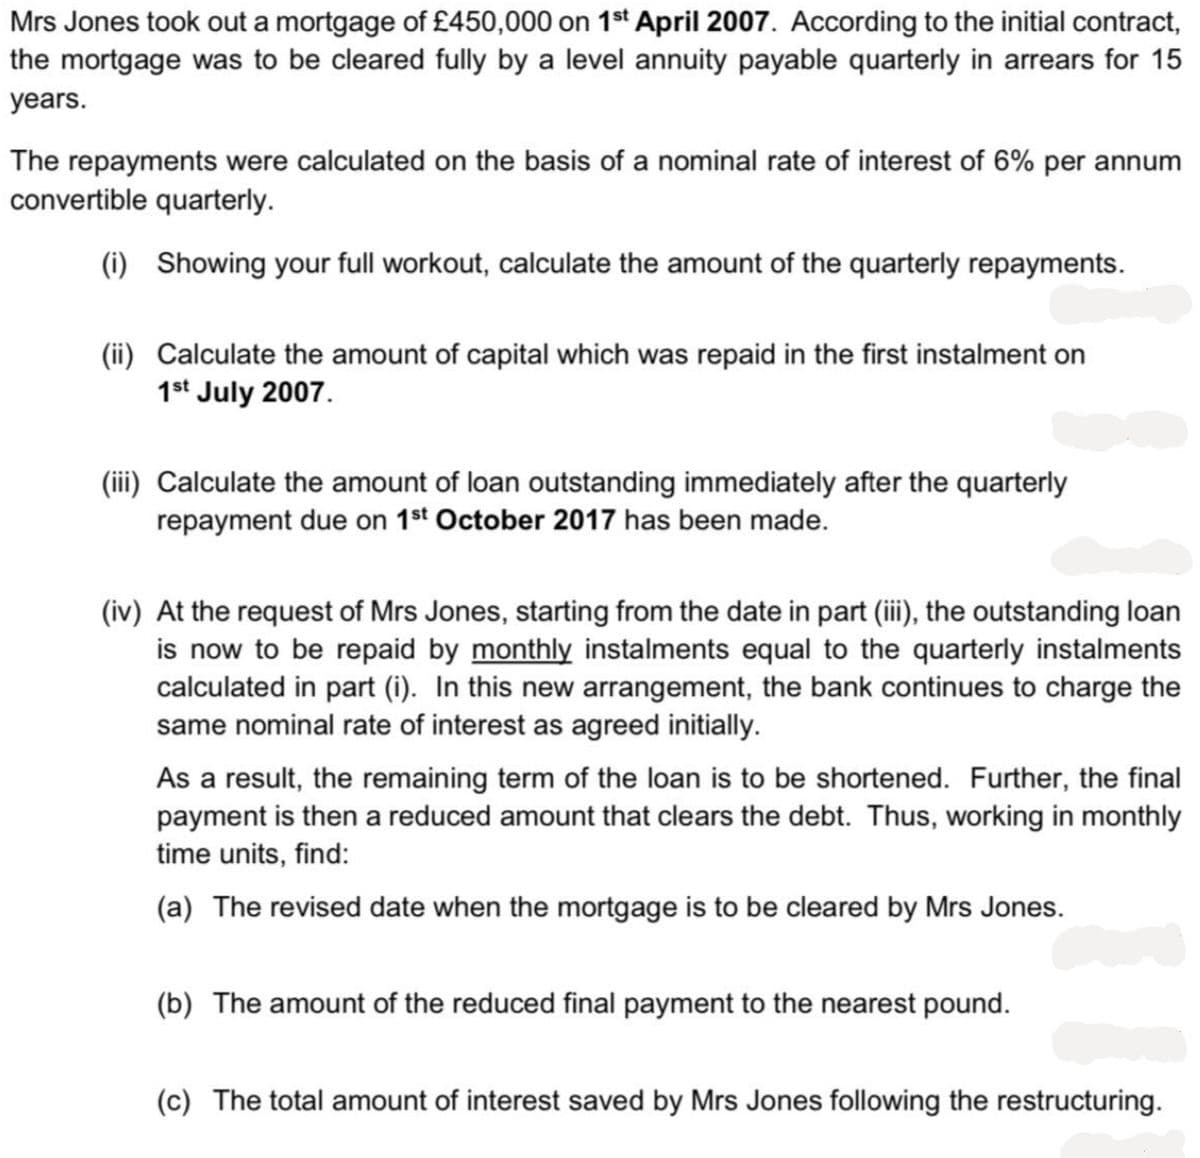 Mrs Jones took out a mortgage of £450,000 on 1st April 2007. According to the initial contract,
the mortgage was to be cleared fully by a level annuity payable quarterly in arrears for 15
years.
The repayments were calculated on the basis of a nominal rate of interest of 6% per annum
convertible quarterly.
(i) Showing your full workout, calculate the amount of the quarterly repayments.
(ii) Calculate the amount of capital which was repaid in the first instalment on
1st July 2007.
(iii) Calculate the amount of loan outstanding immediately after the quarterly
repayment due on 1st October 2017 has been made.
(iv) At the request of Mrs Jones, starting from the date in part (iii), the outstanding loan
is now to be repaid by monthly instalments equal to the quarterly instalments
calculated in part (i). In this new arrangement, the bank continues to charge the
same nominal rate of interest as agreed initially.
As a result, the remaining term of the loan is to be shortened. Further, the final
payment is then a reduced amount that clears the debt. Thus, working in monthly
time units, find:
(a) The revised date when the mortgage is to be cleared by Mrs Jones.
(b) The amount of the reduced final payment to the nearest pound.
(c) The total amount of interest saved by Mrs Jones following the restructuring.